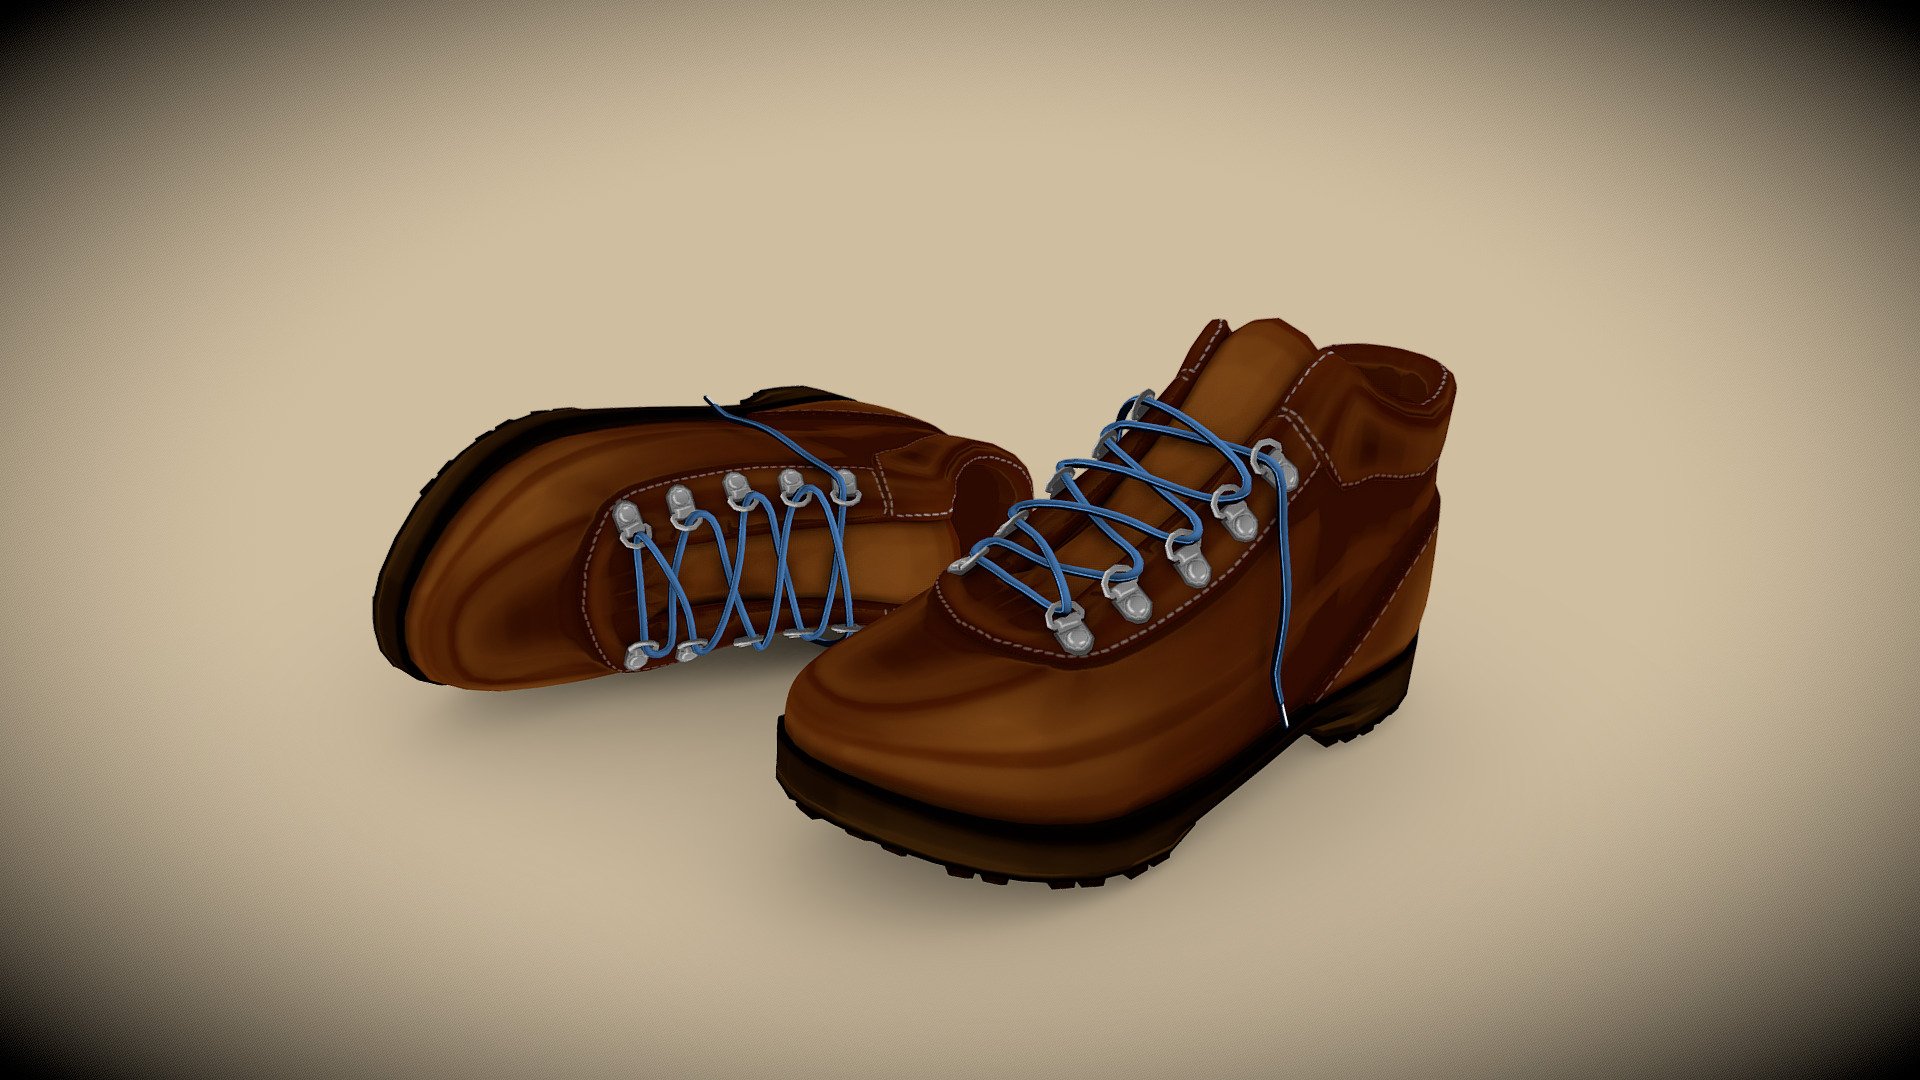 You always need good sturdy pair of boots whenever you travel. Who knows when you're gonna have an impromptu hike?

Modeled in Maya and textured in Substance Painter 3d model